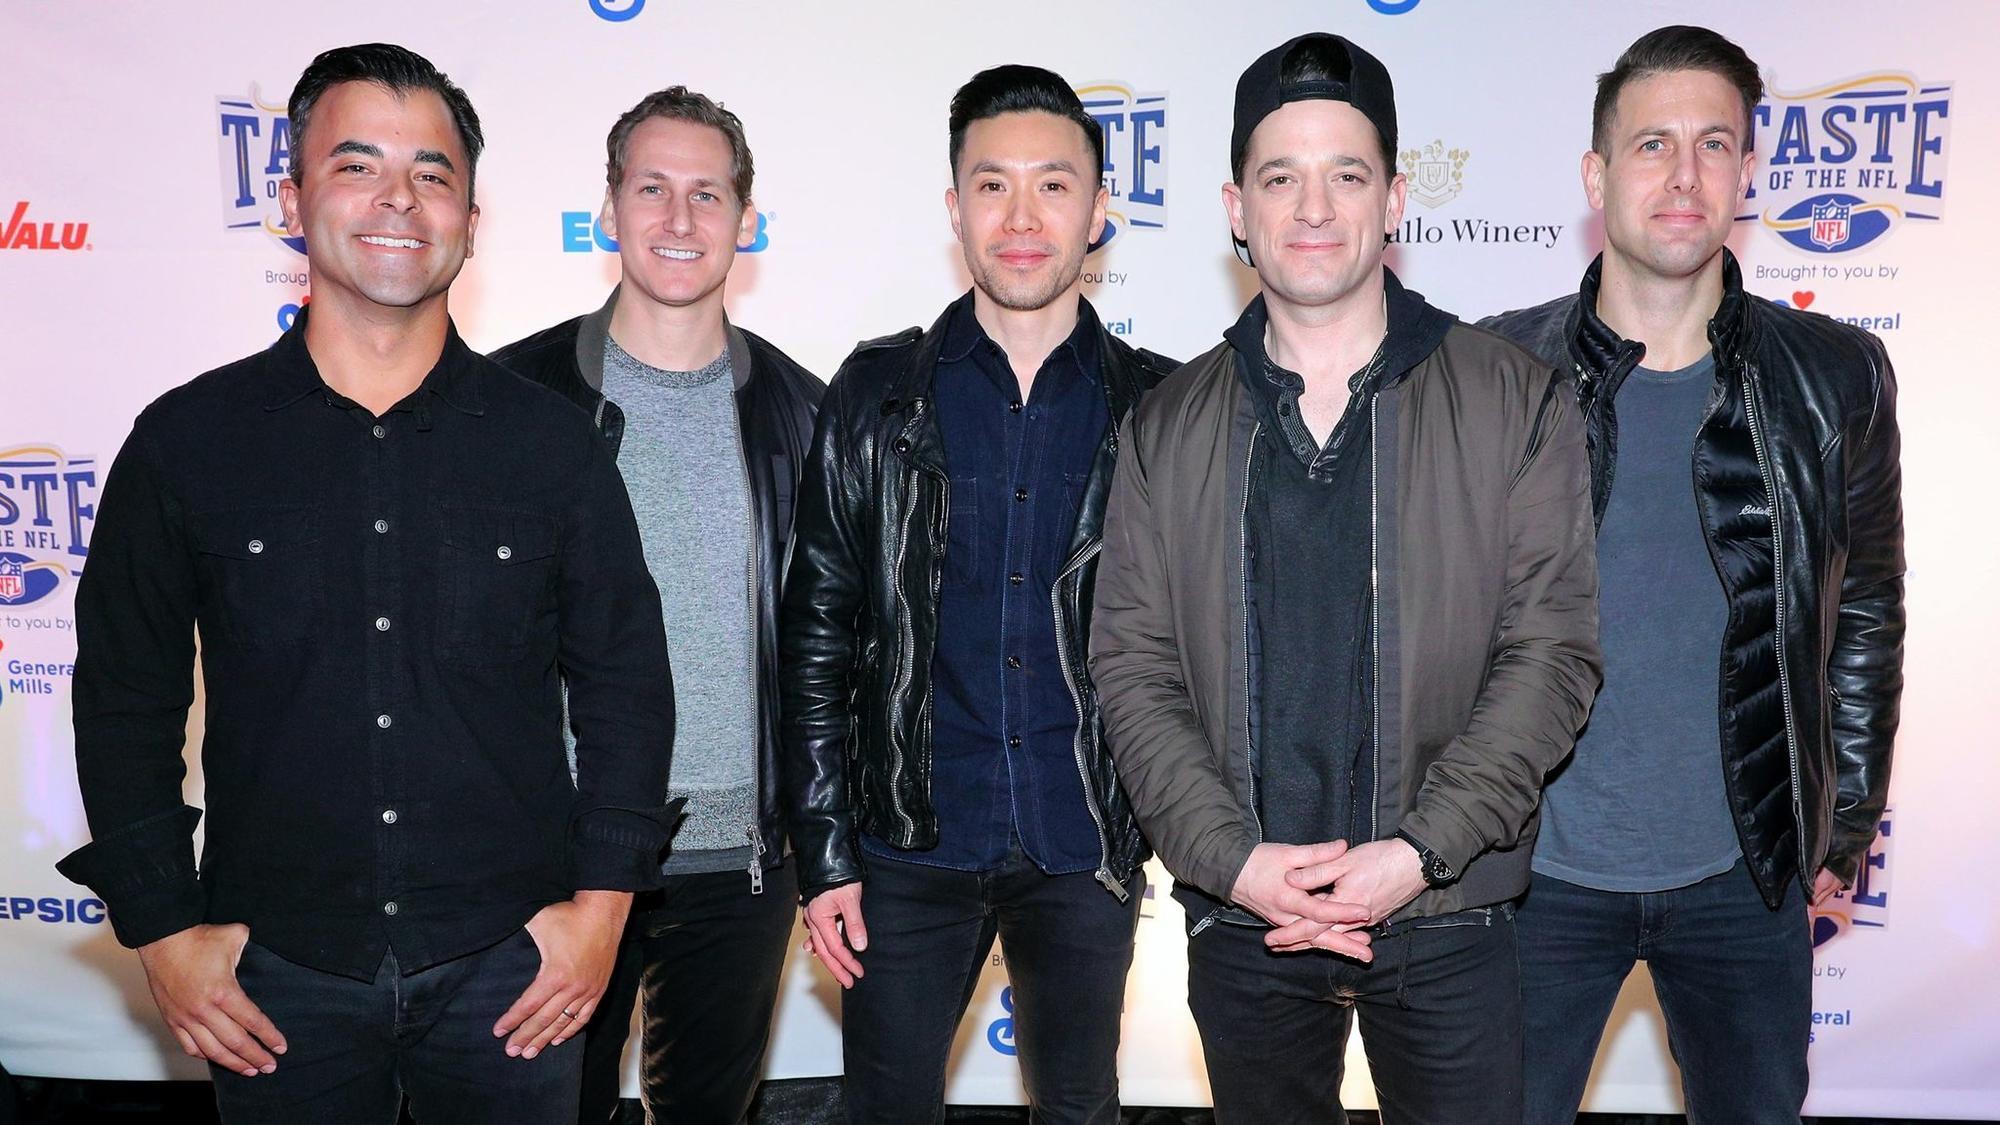 O.A.R. and OAR: Band from Rockville finds unlikely connection with Russia, Olympics - Baltimore Sun